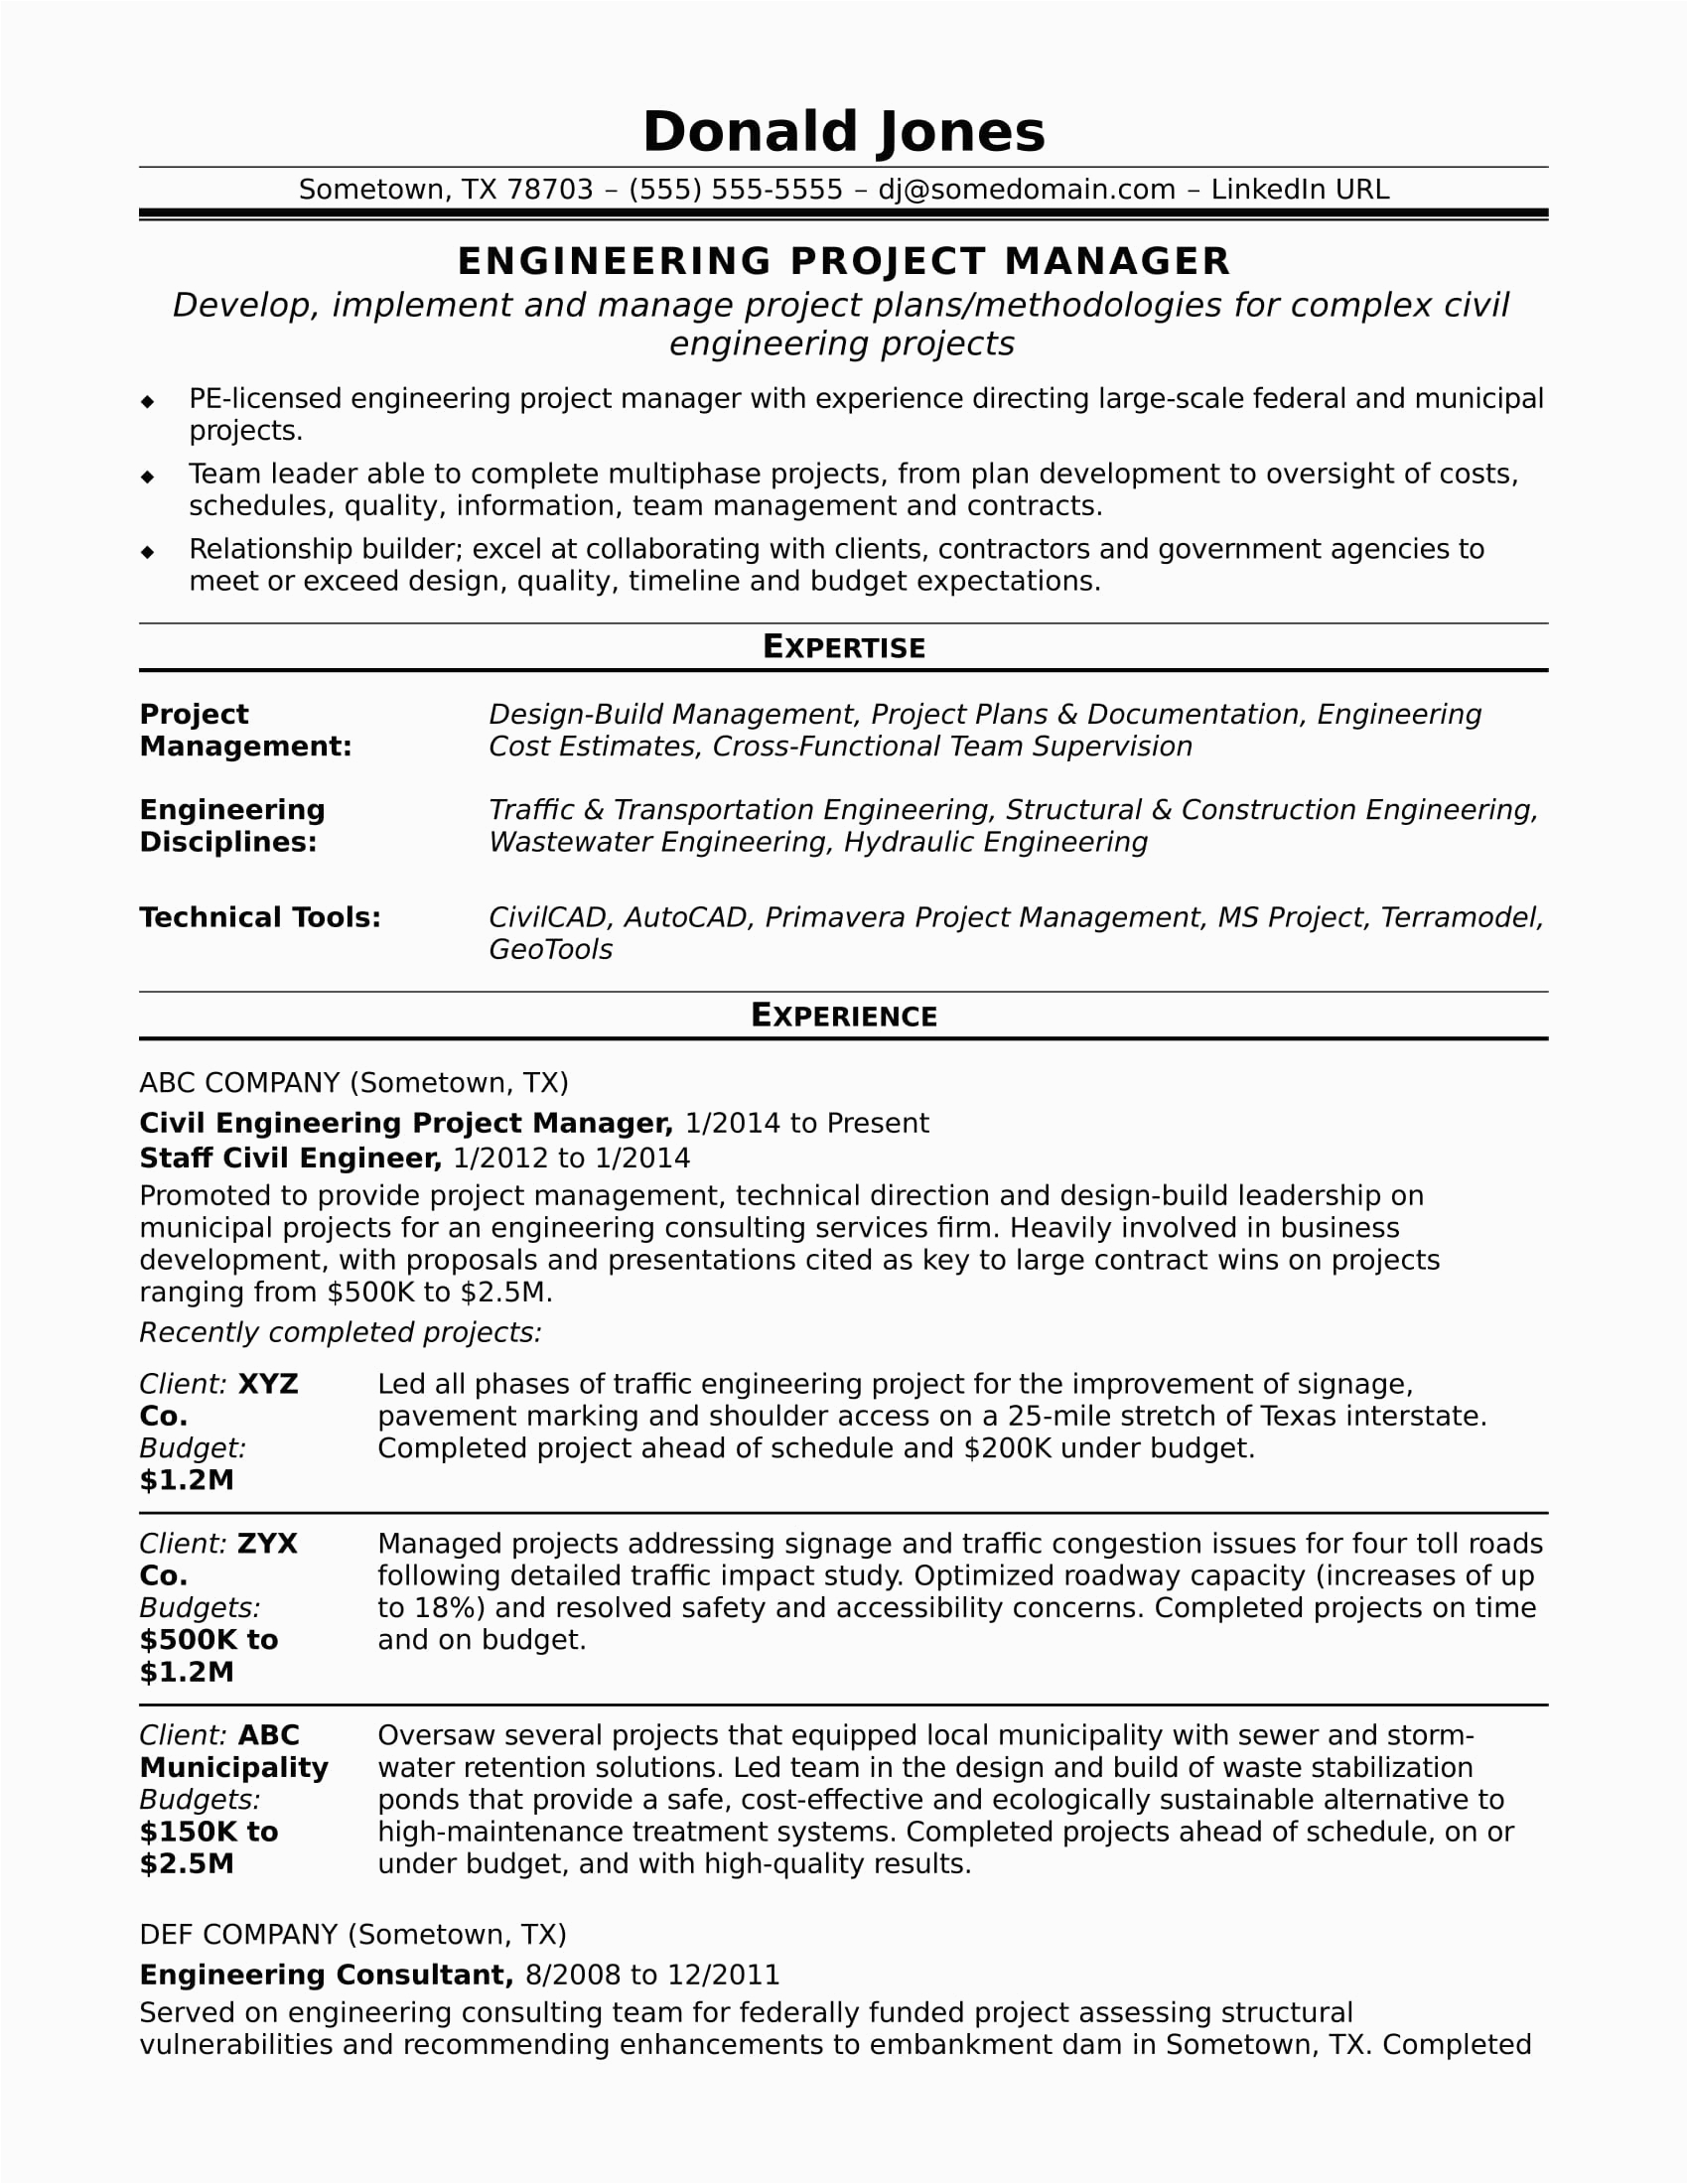 Resume Sample for A Project Manager In Engineering Sample Resume for A Midlevel Engineering Project Manager